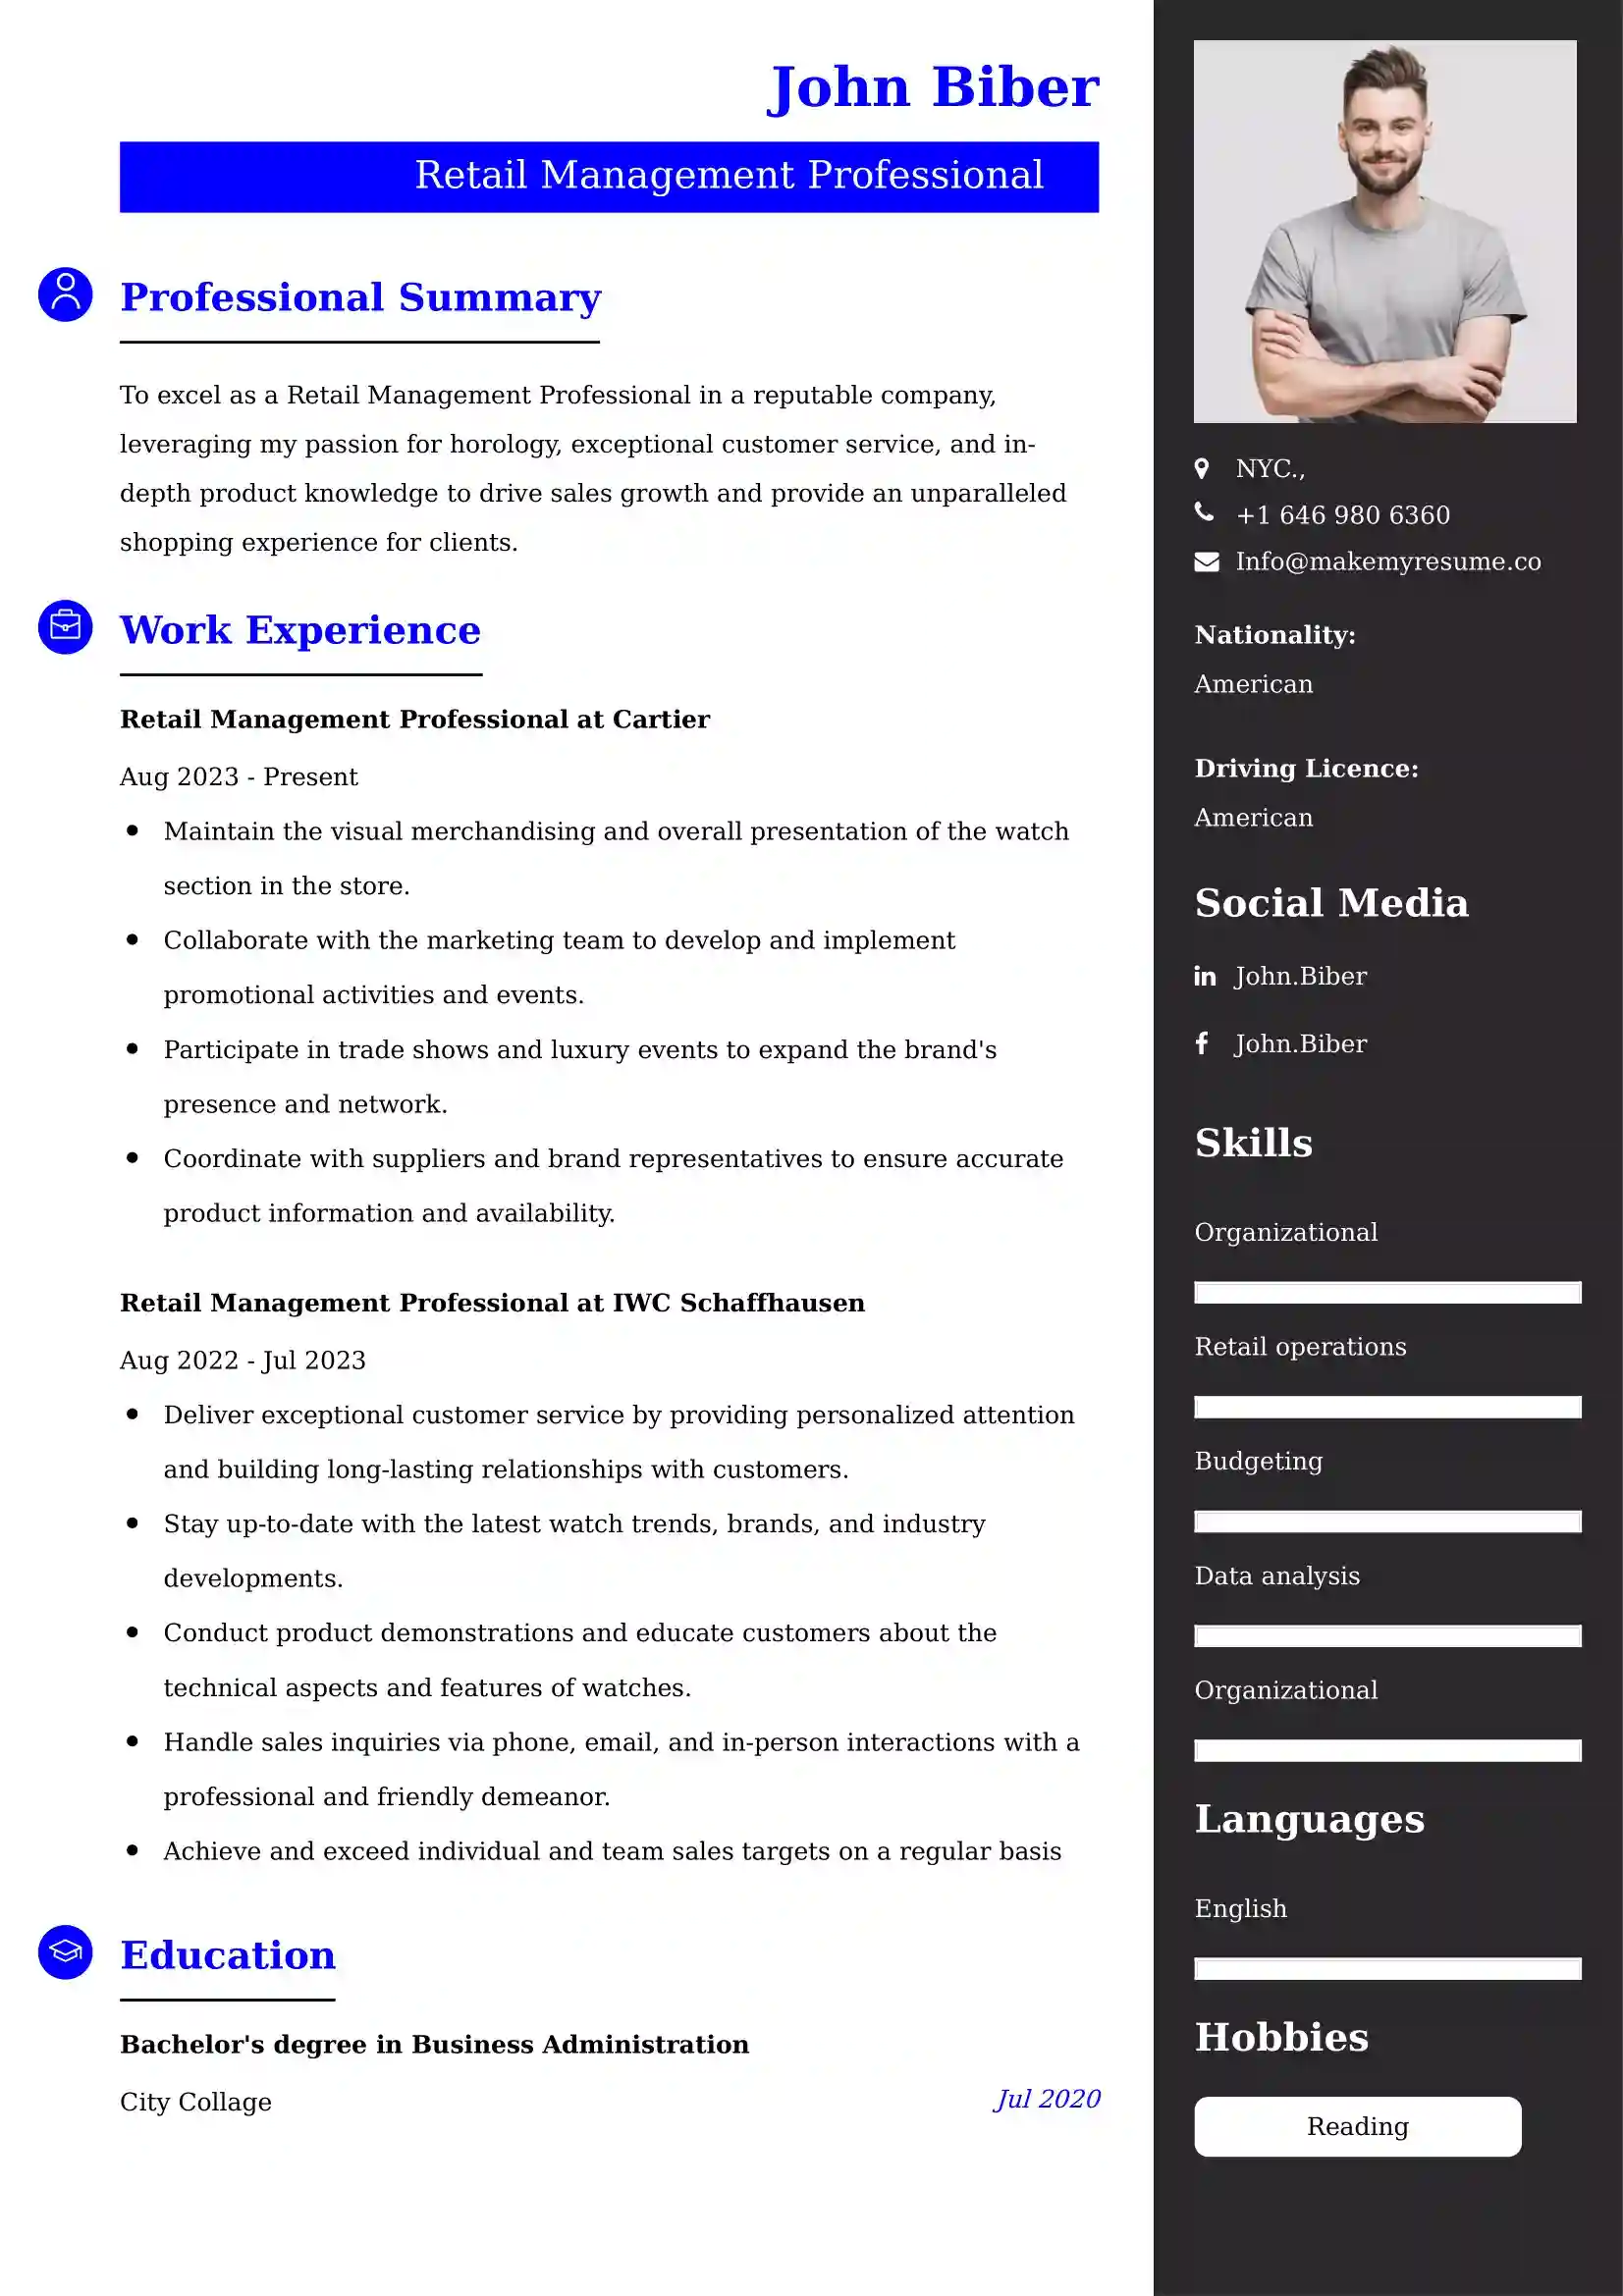 Retail Management Professional Resume Examples - Australian Format and Tips